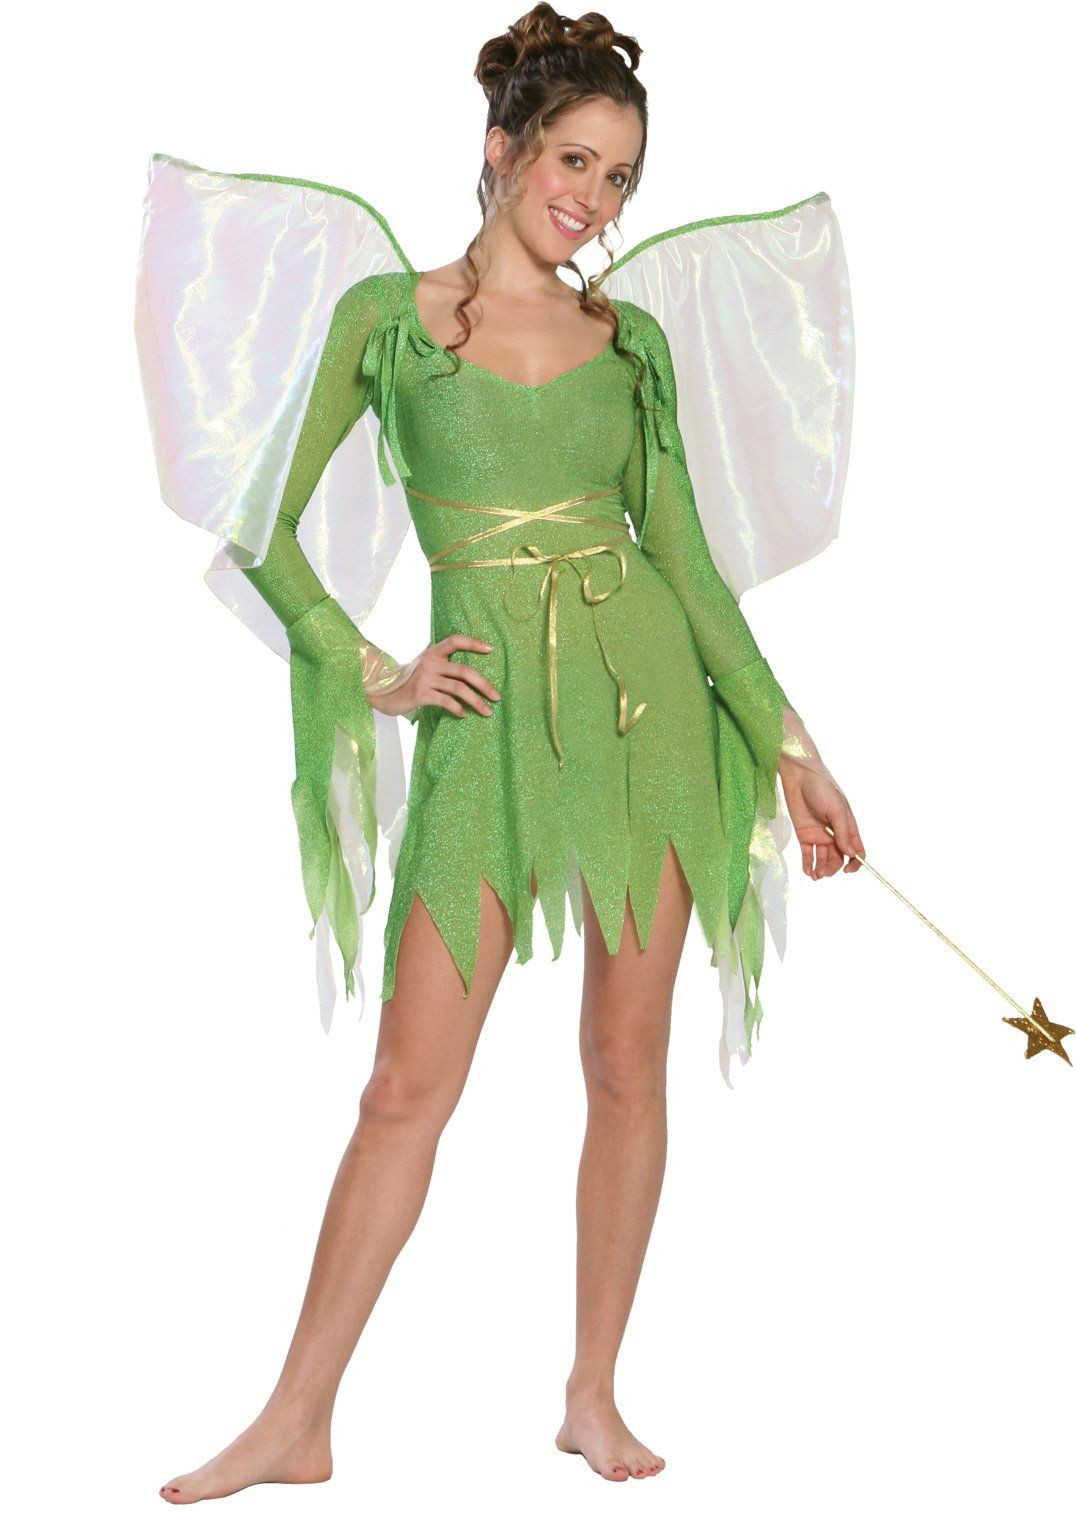 Tinkerbell Costume Adult DIY
 Pin on costumes